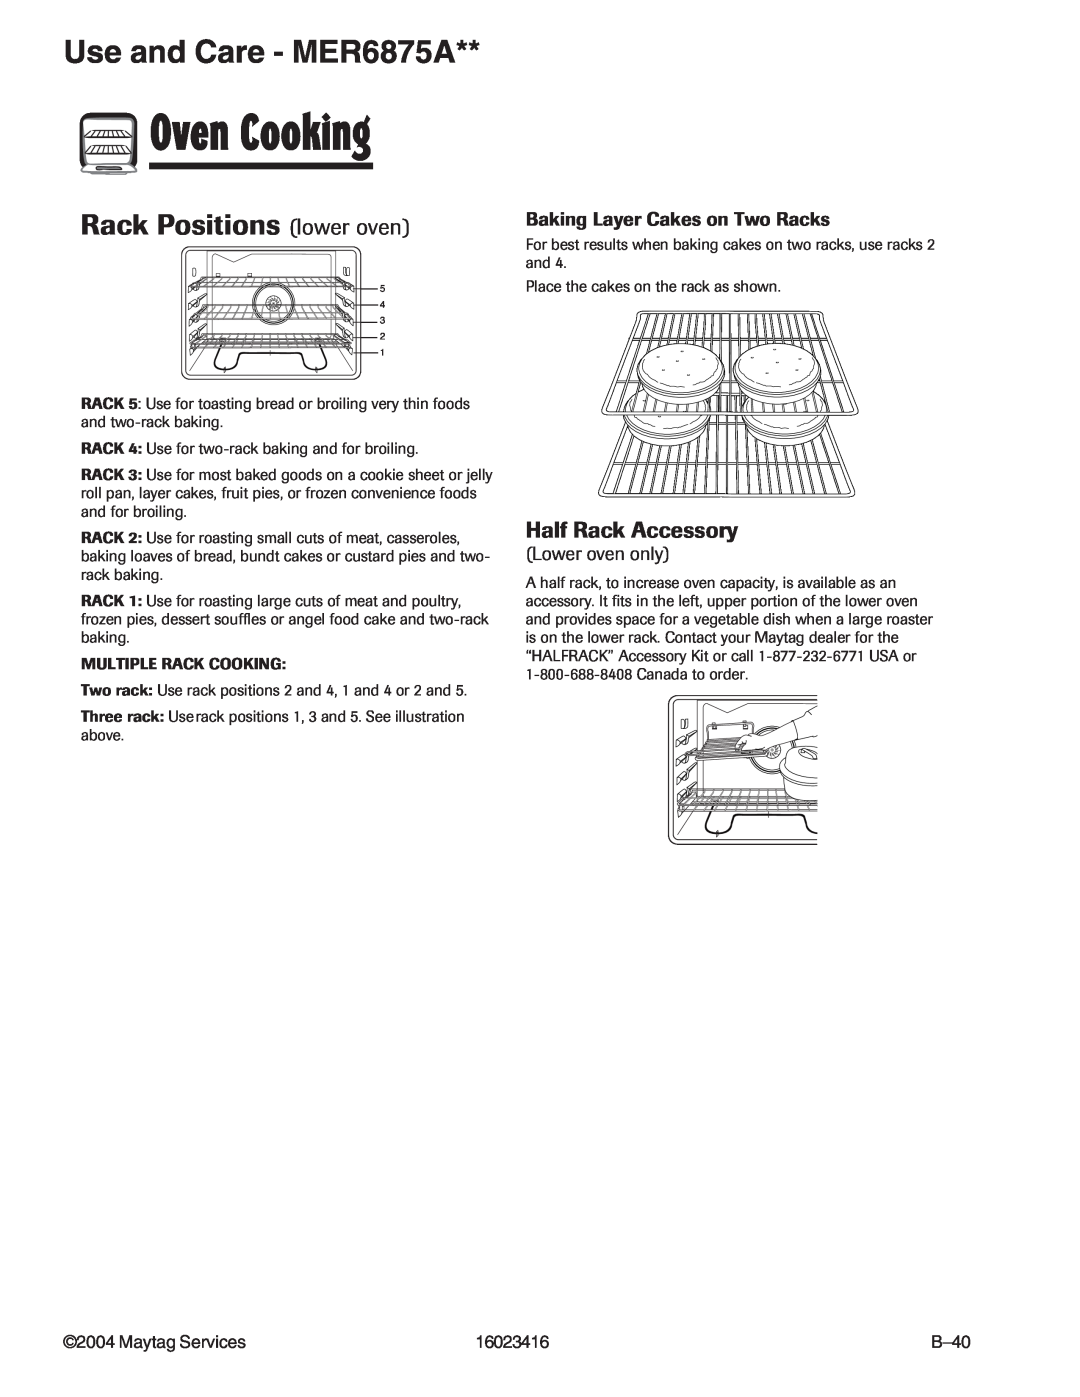 Maytag MER6775AAB/F/N/Q/S/W manual Rack Positions lower oven, Half Rack Accessory, Oven Cooking, Use and Care - MER6875A 